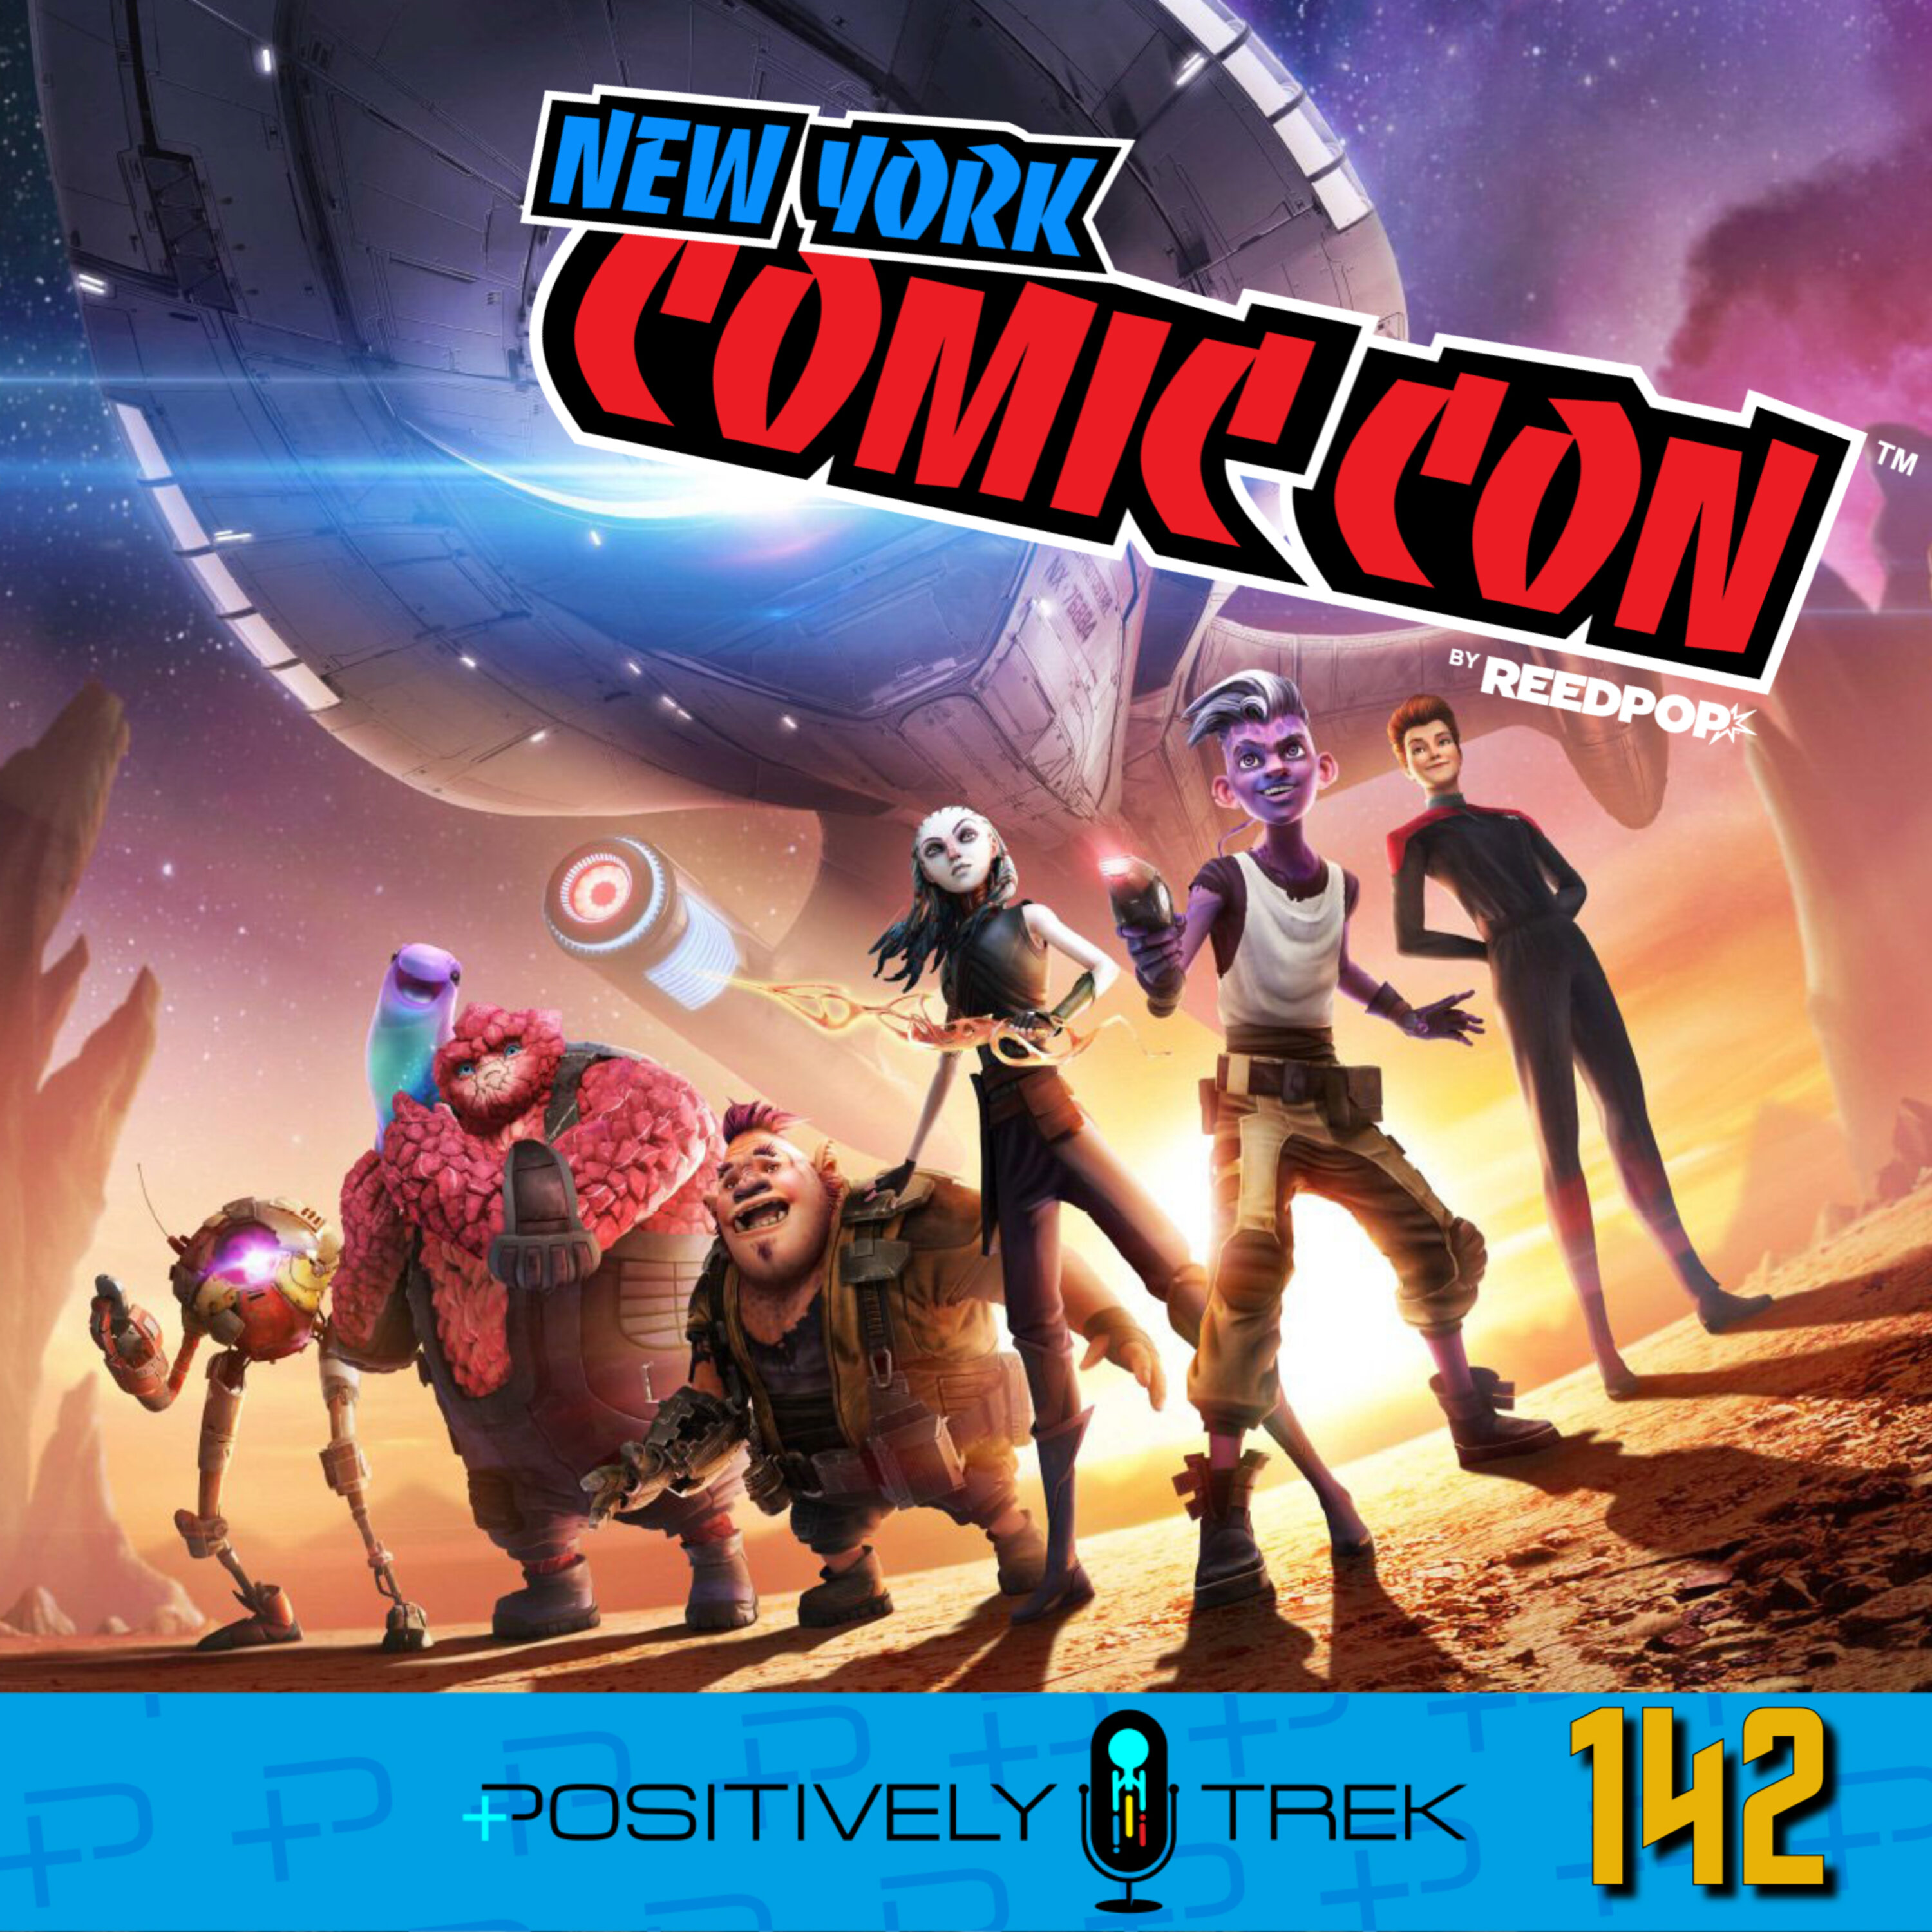 Discovery & Prodigy at NYCC, Trek Film News, and More! Image